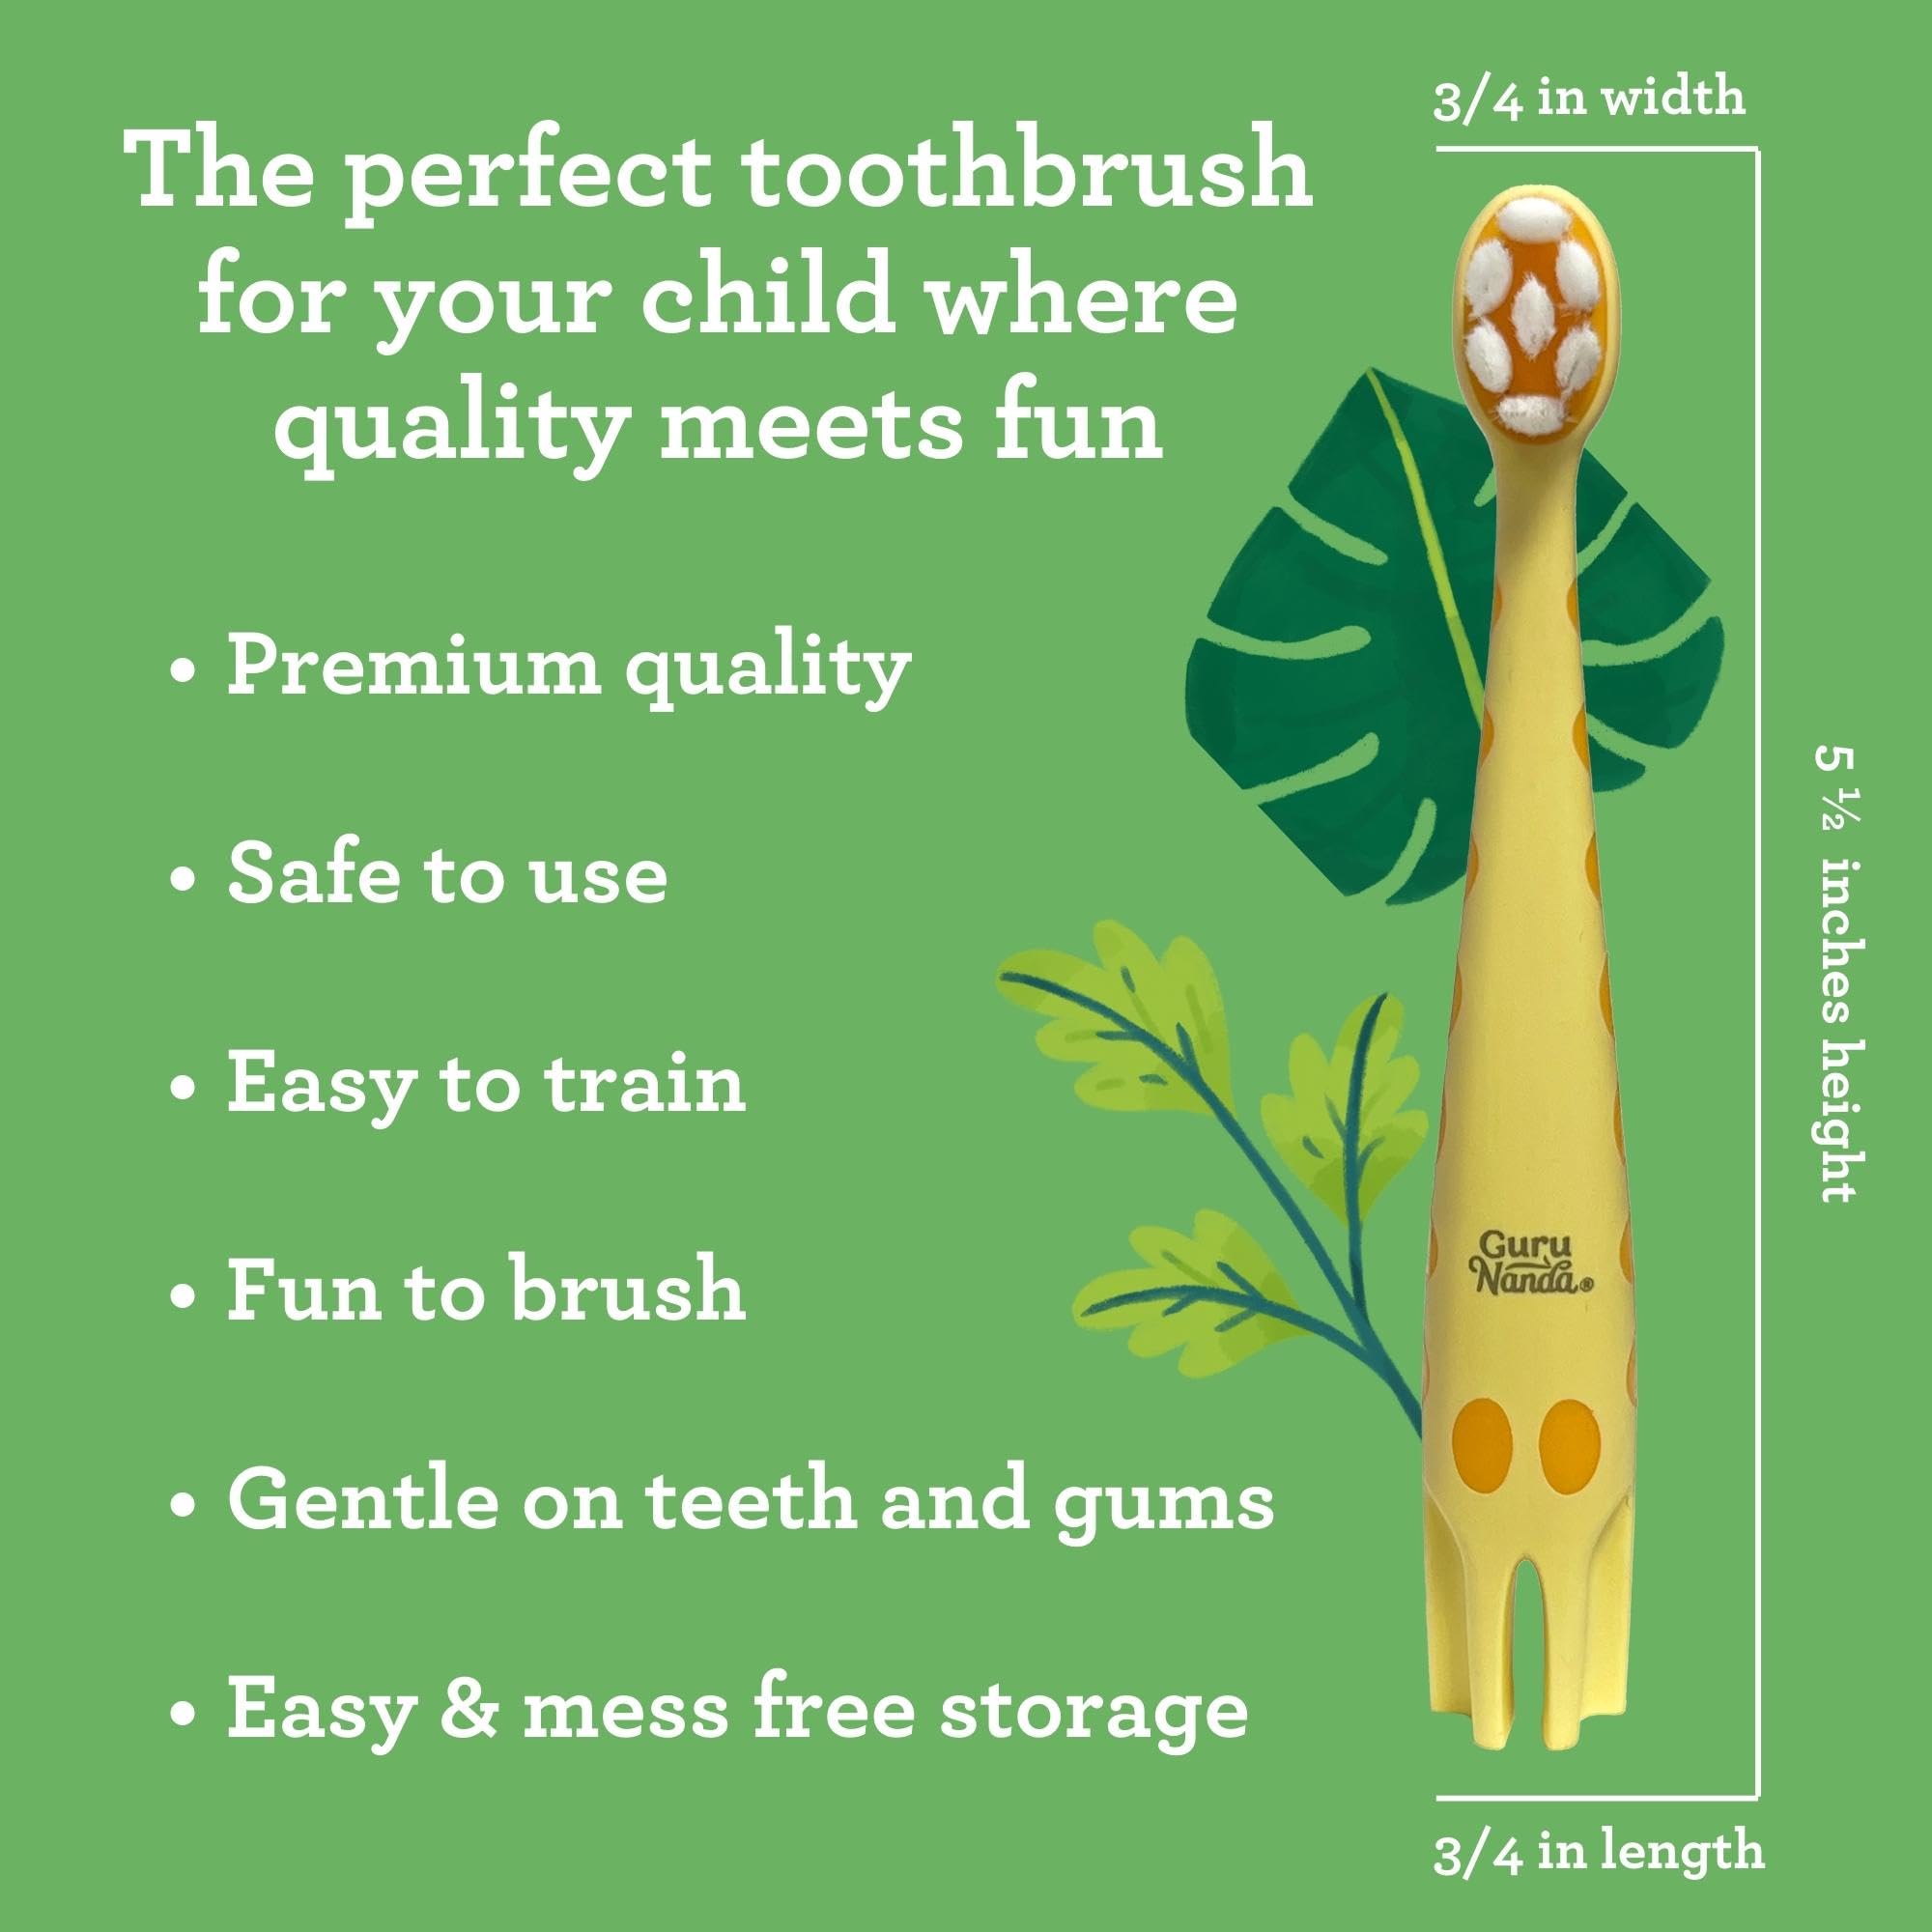 GuruNanda Kids Butter On Gums Training Toothbrush with Cover - Cute Giraffe Design, Extra Soft Bristles for Gentle Cleaning - Ergonomic Handle - BPA & Cruelty Free - 1 Pack (Age 1+)